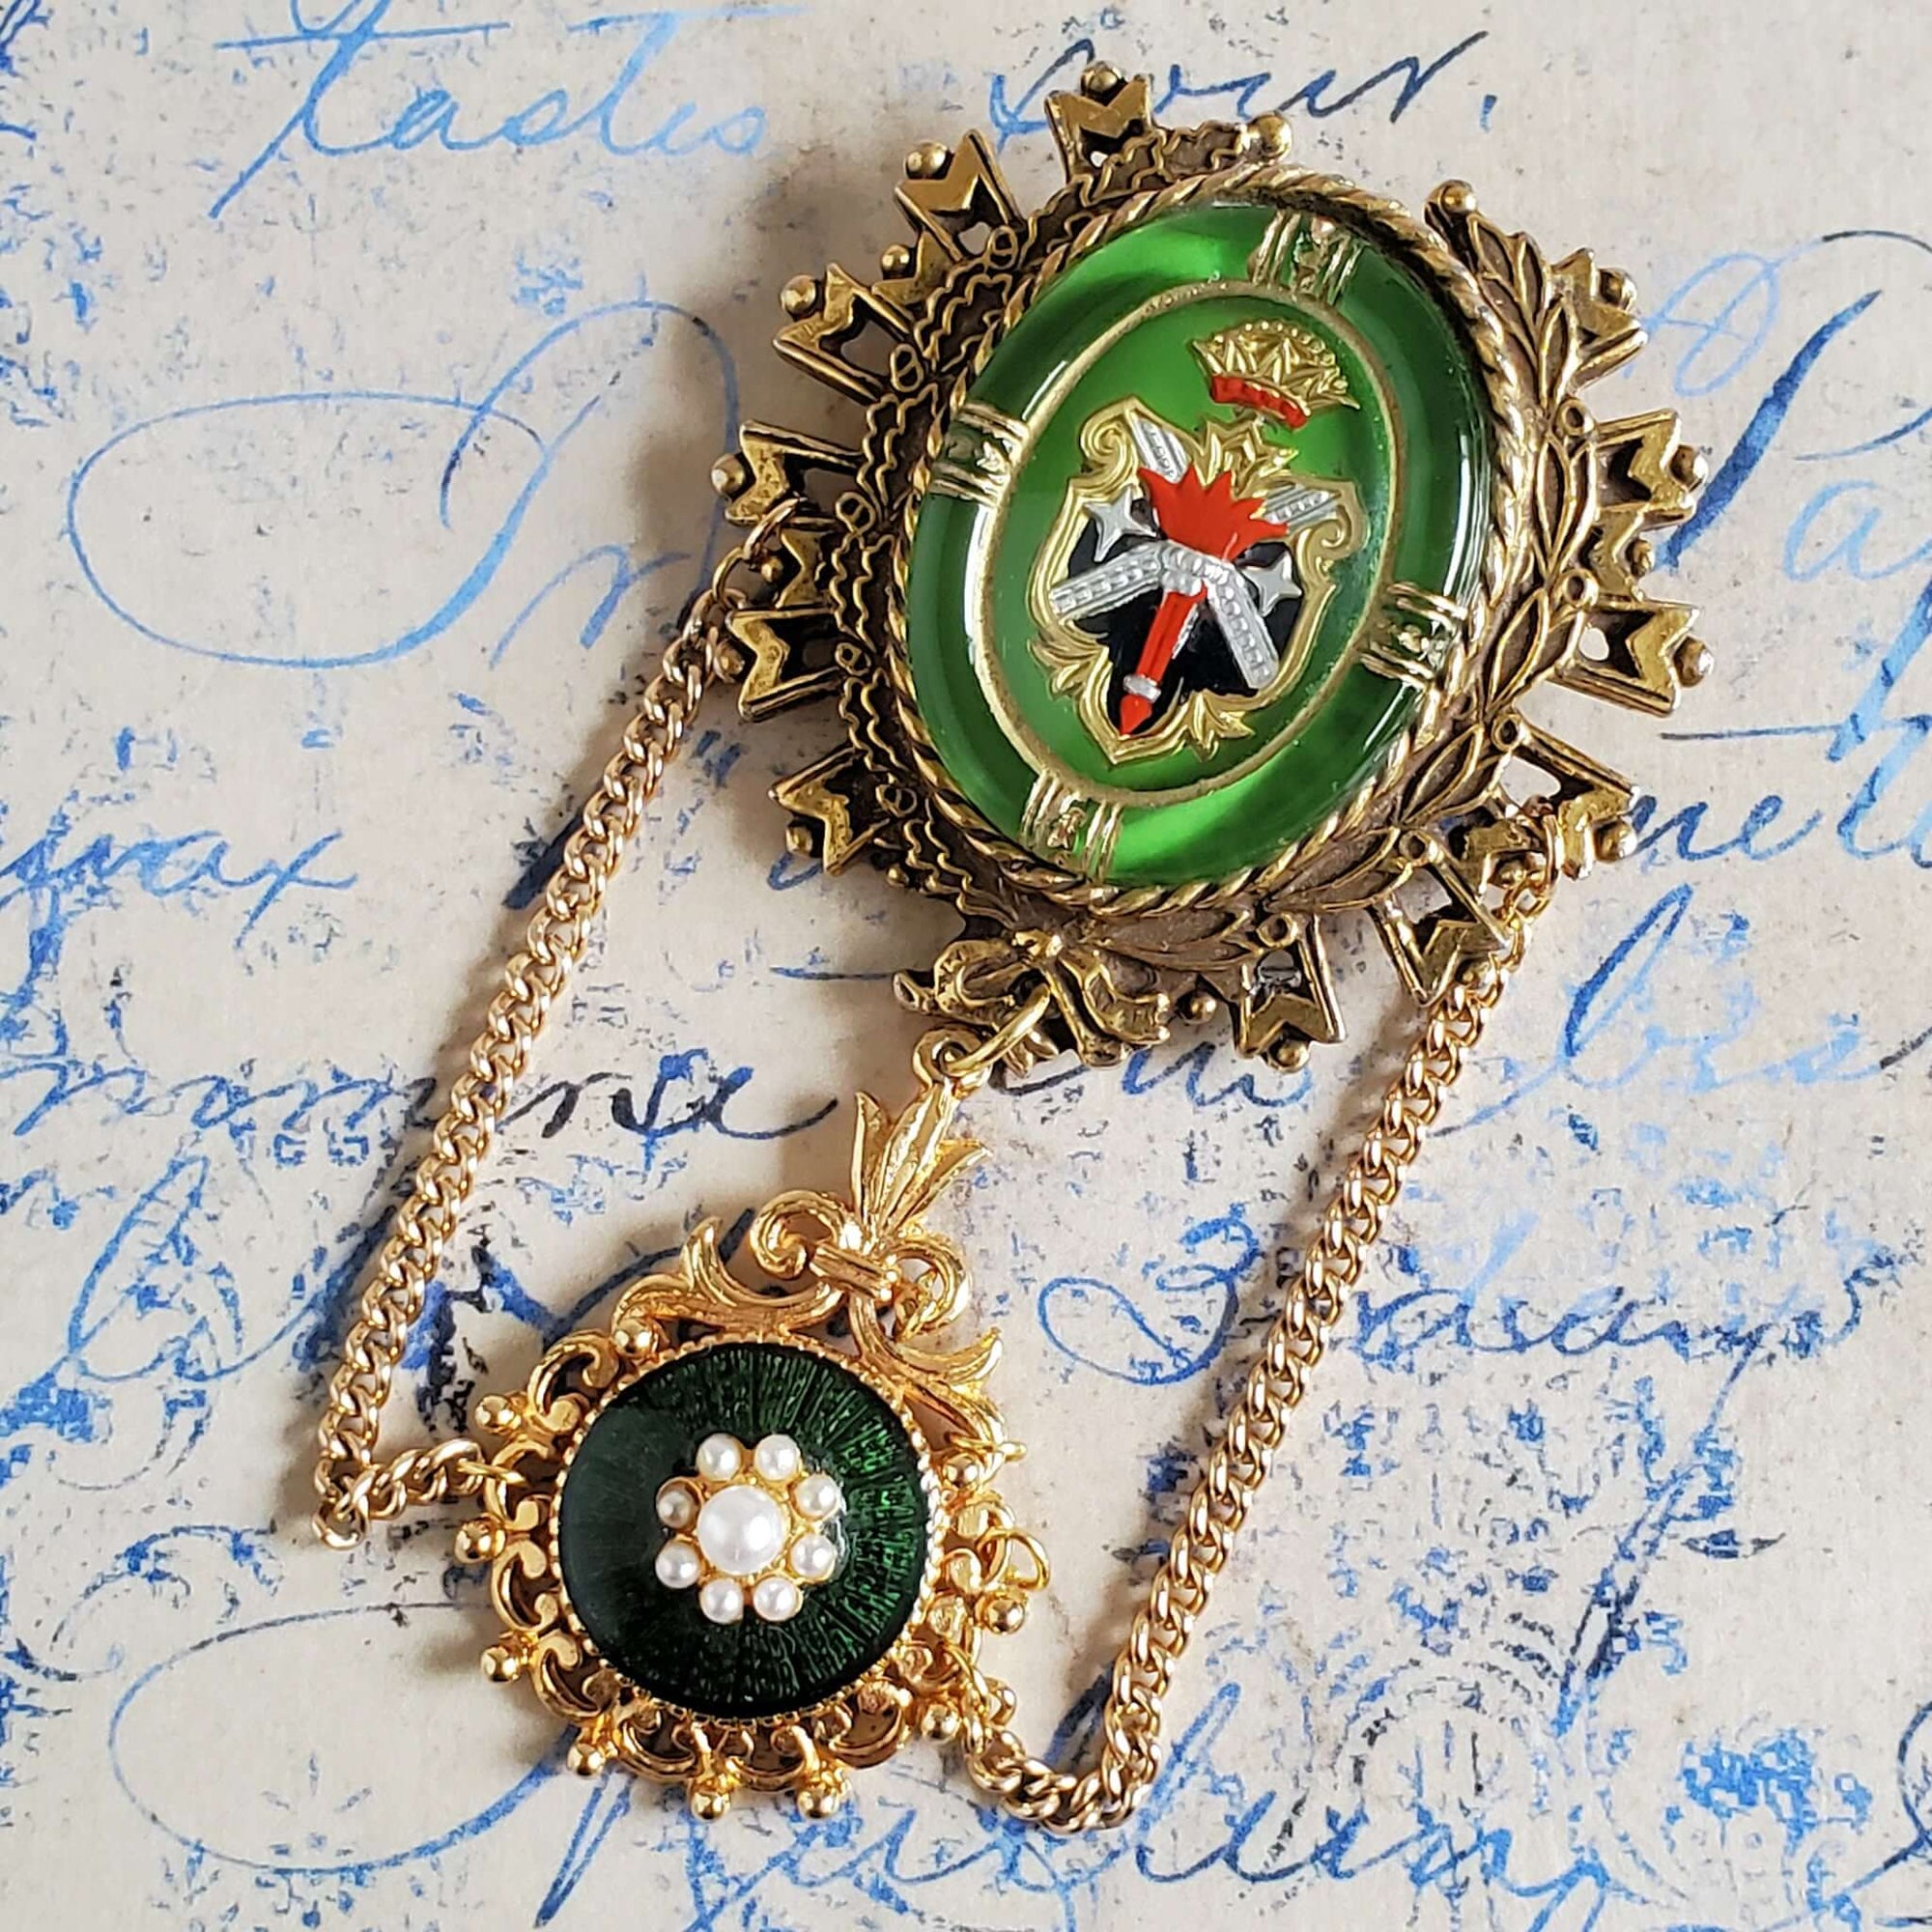 Dual Green Pendant Brooch with Chains